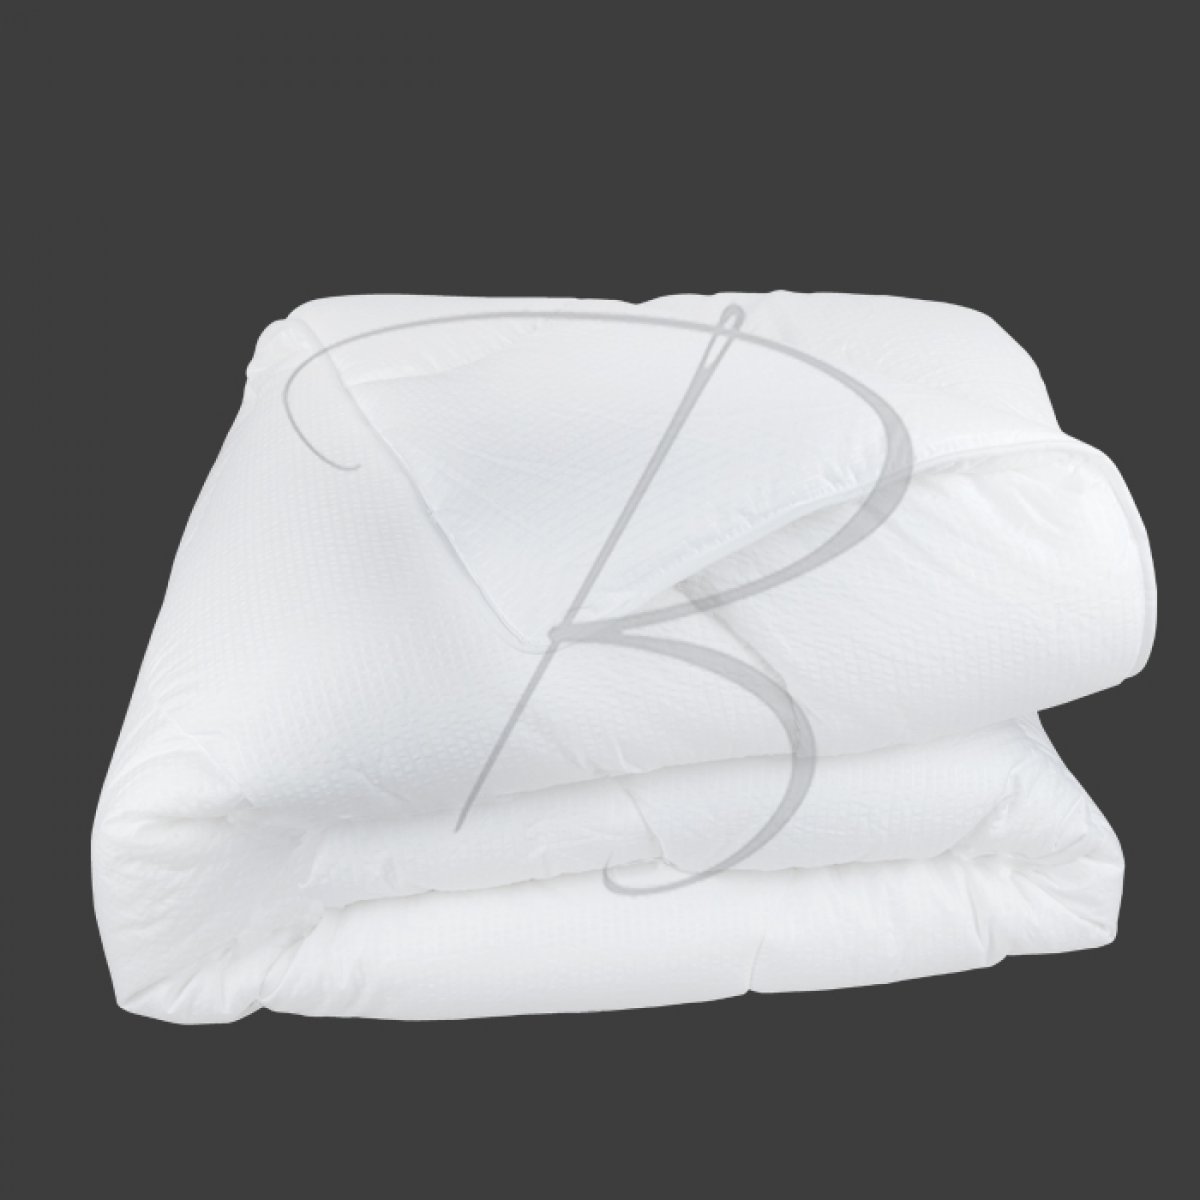 COMETE synthetic comforter - 450g/m² - 240 x 220